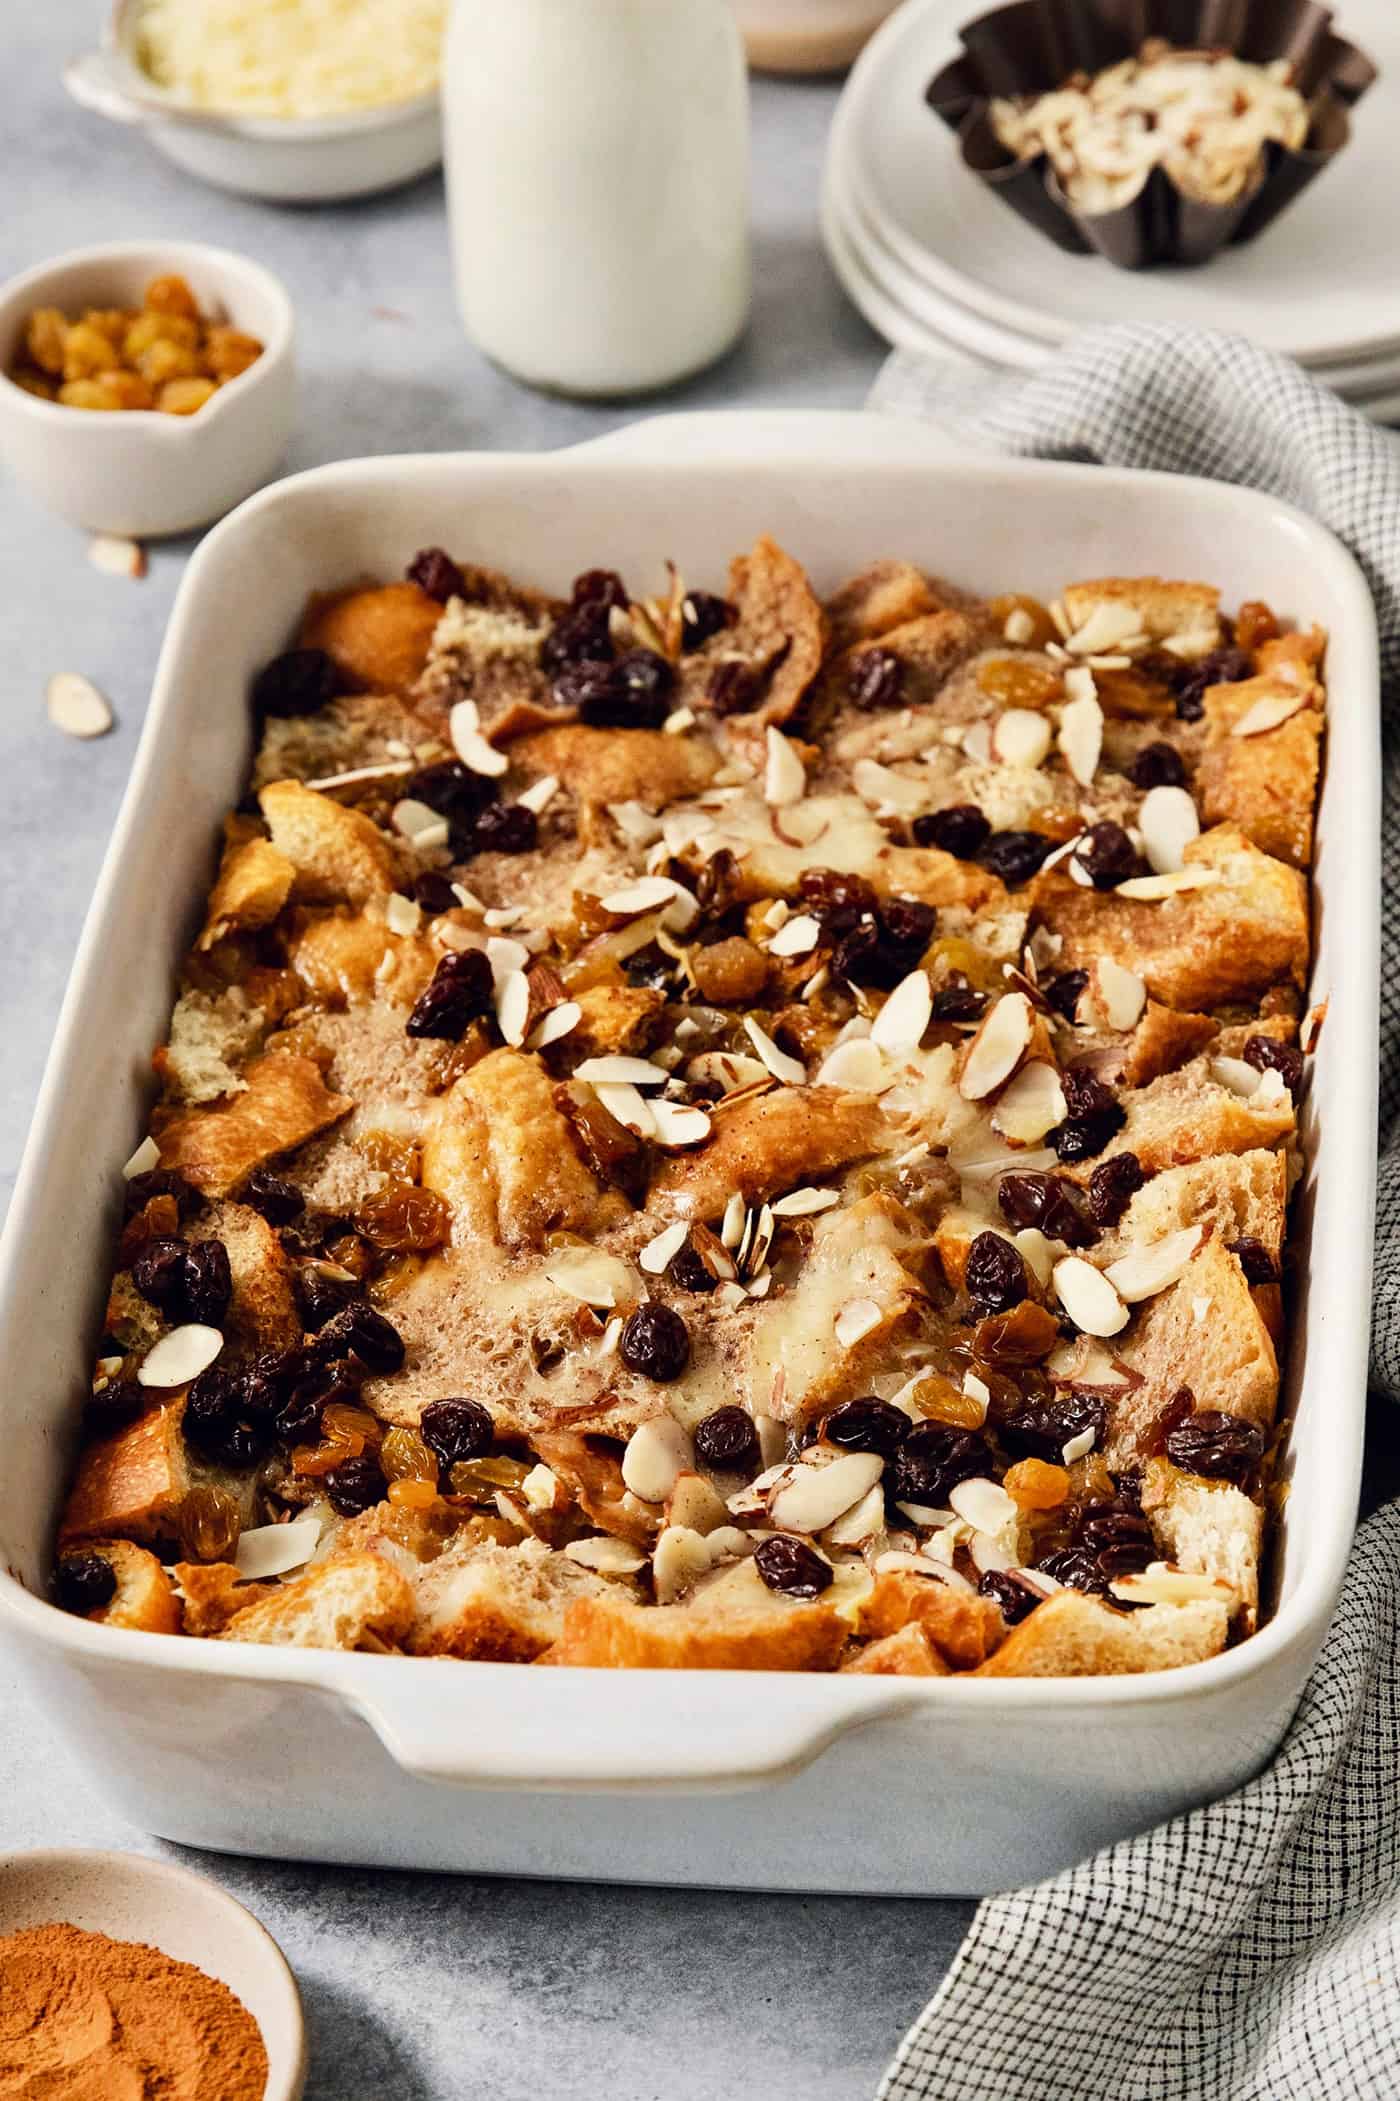 A baking dish full of capirotada topped with raisins and almonds.